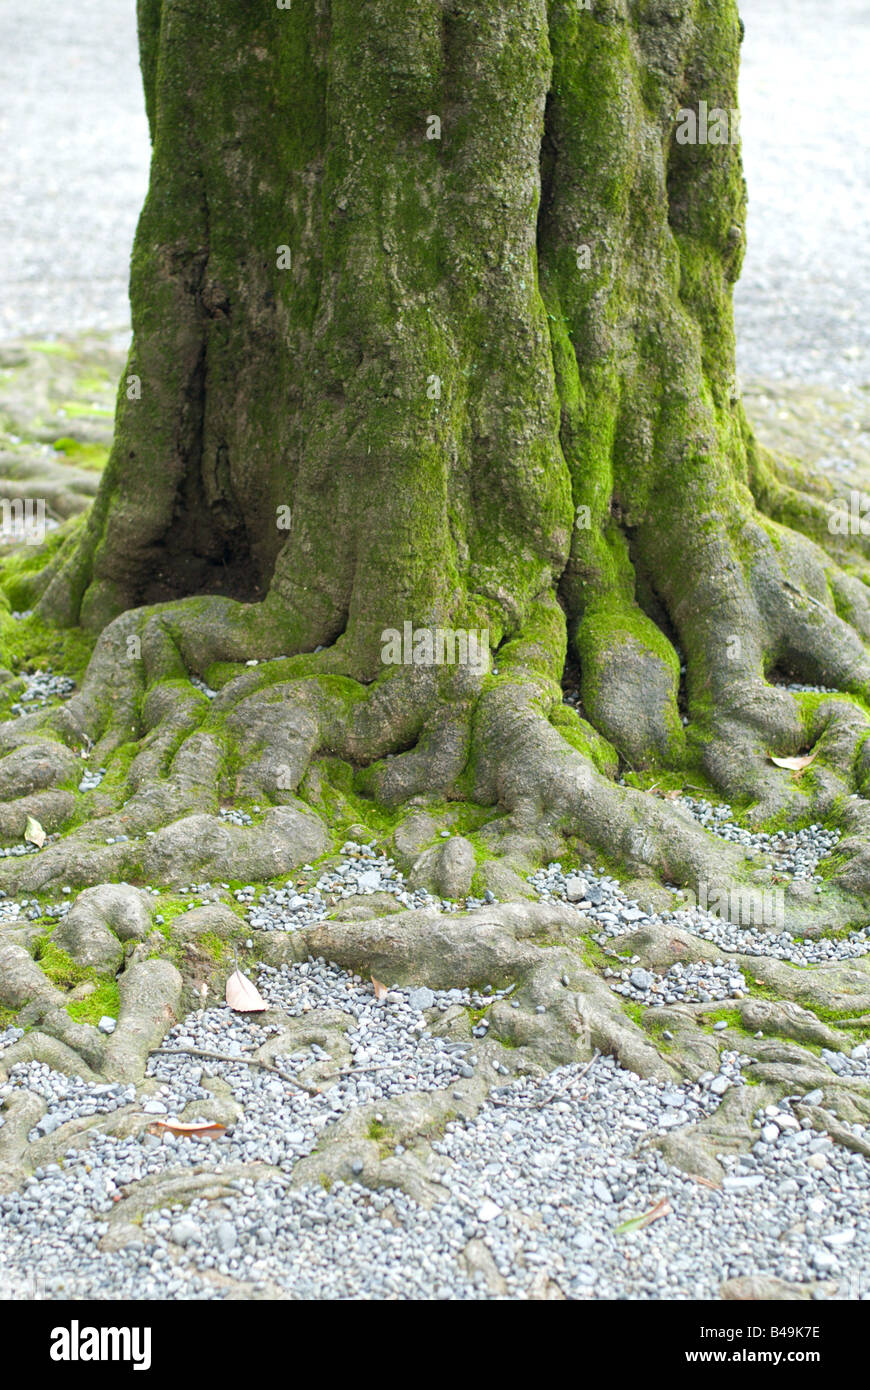 Detail of the mossy trunk and tangled roots of a tree at the Meji Jingu Shrine Tokyo Japan. Stock Photo